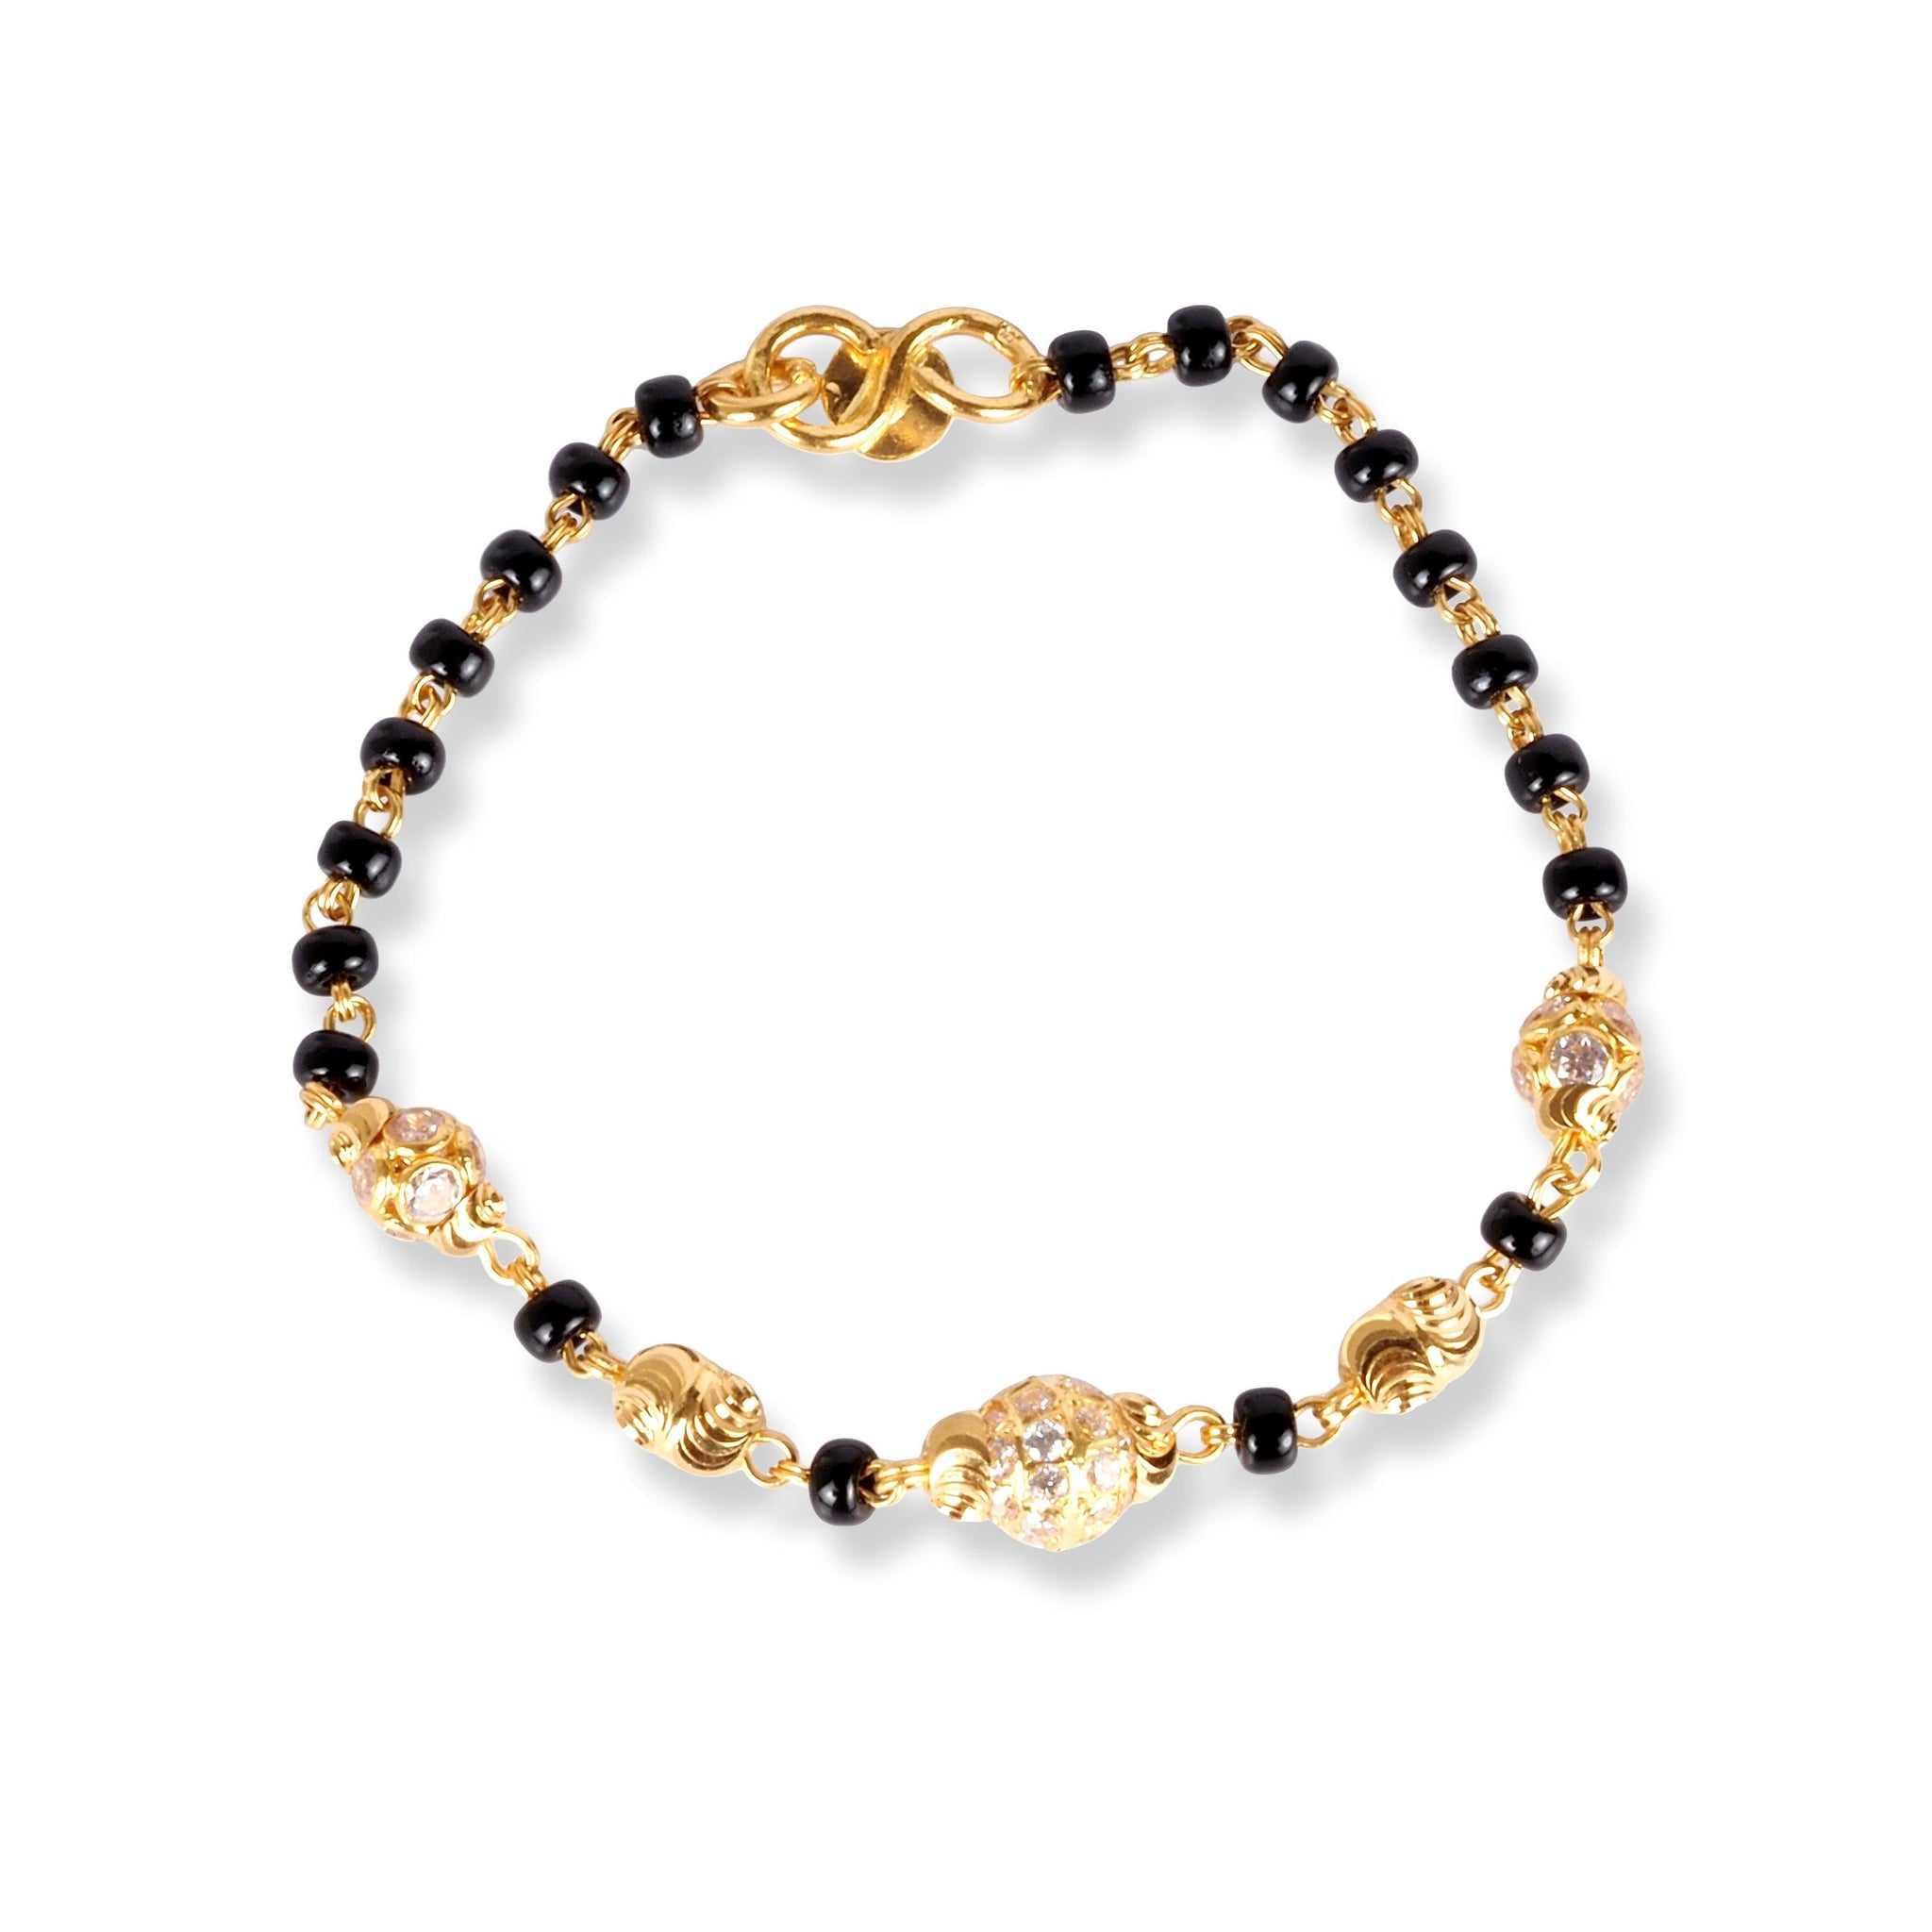 22ct Gold Children's Bracelets with Black Beads and Cubic Zirconia Stones CBR-8465